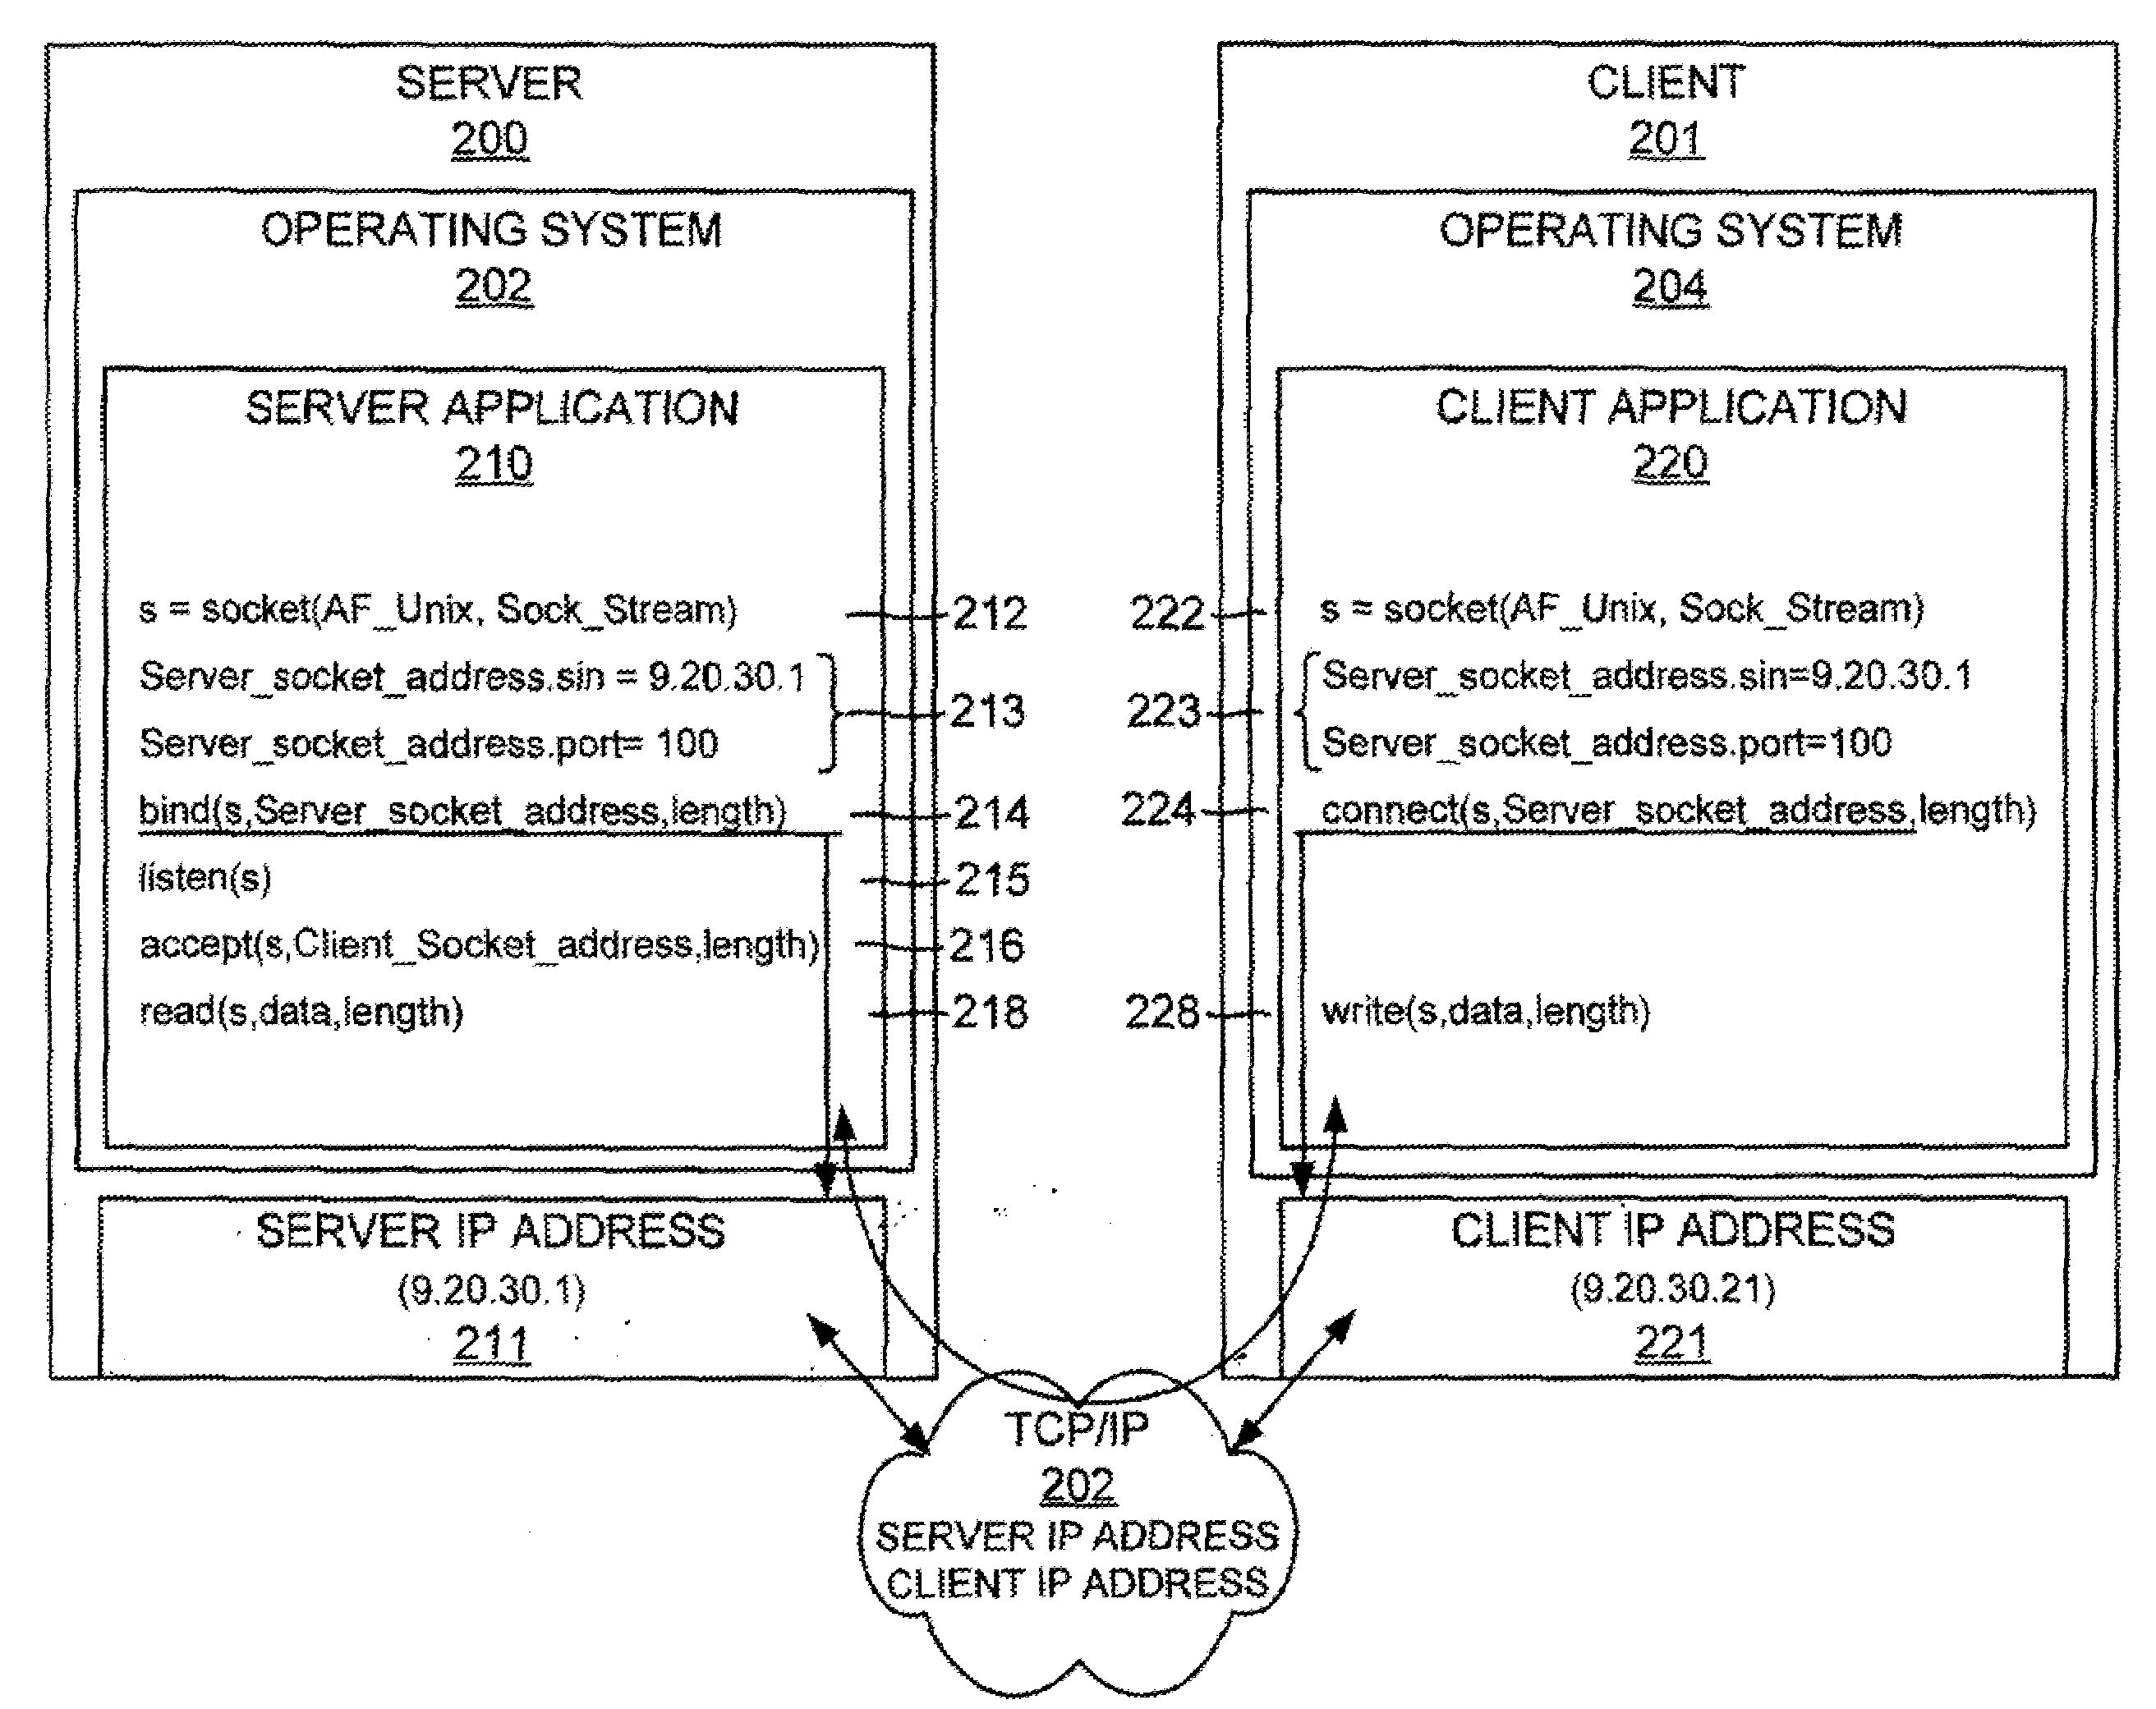 AF UNIX Socket Across Systems in the Same Computer on Computer Systems that Support Multiple Operating System Images